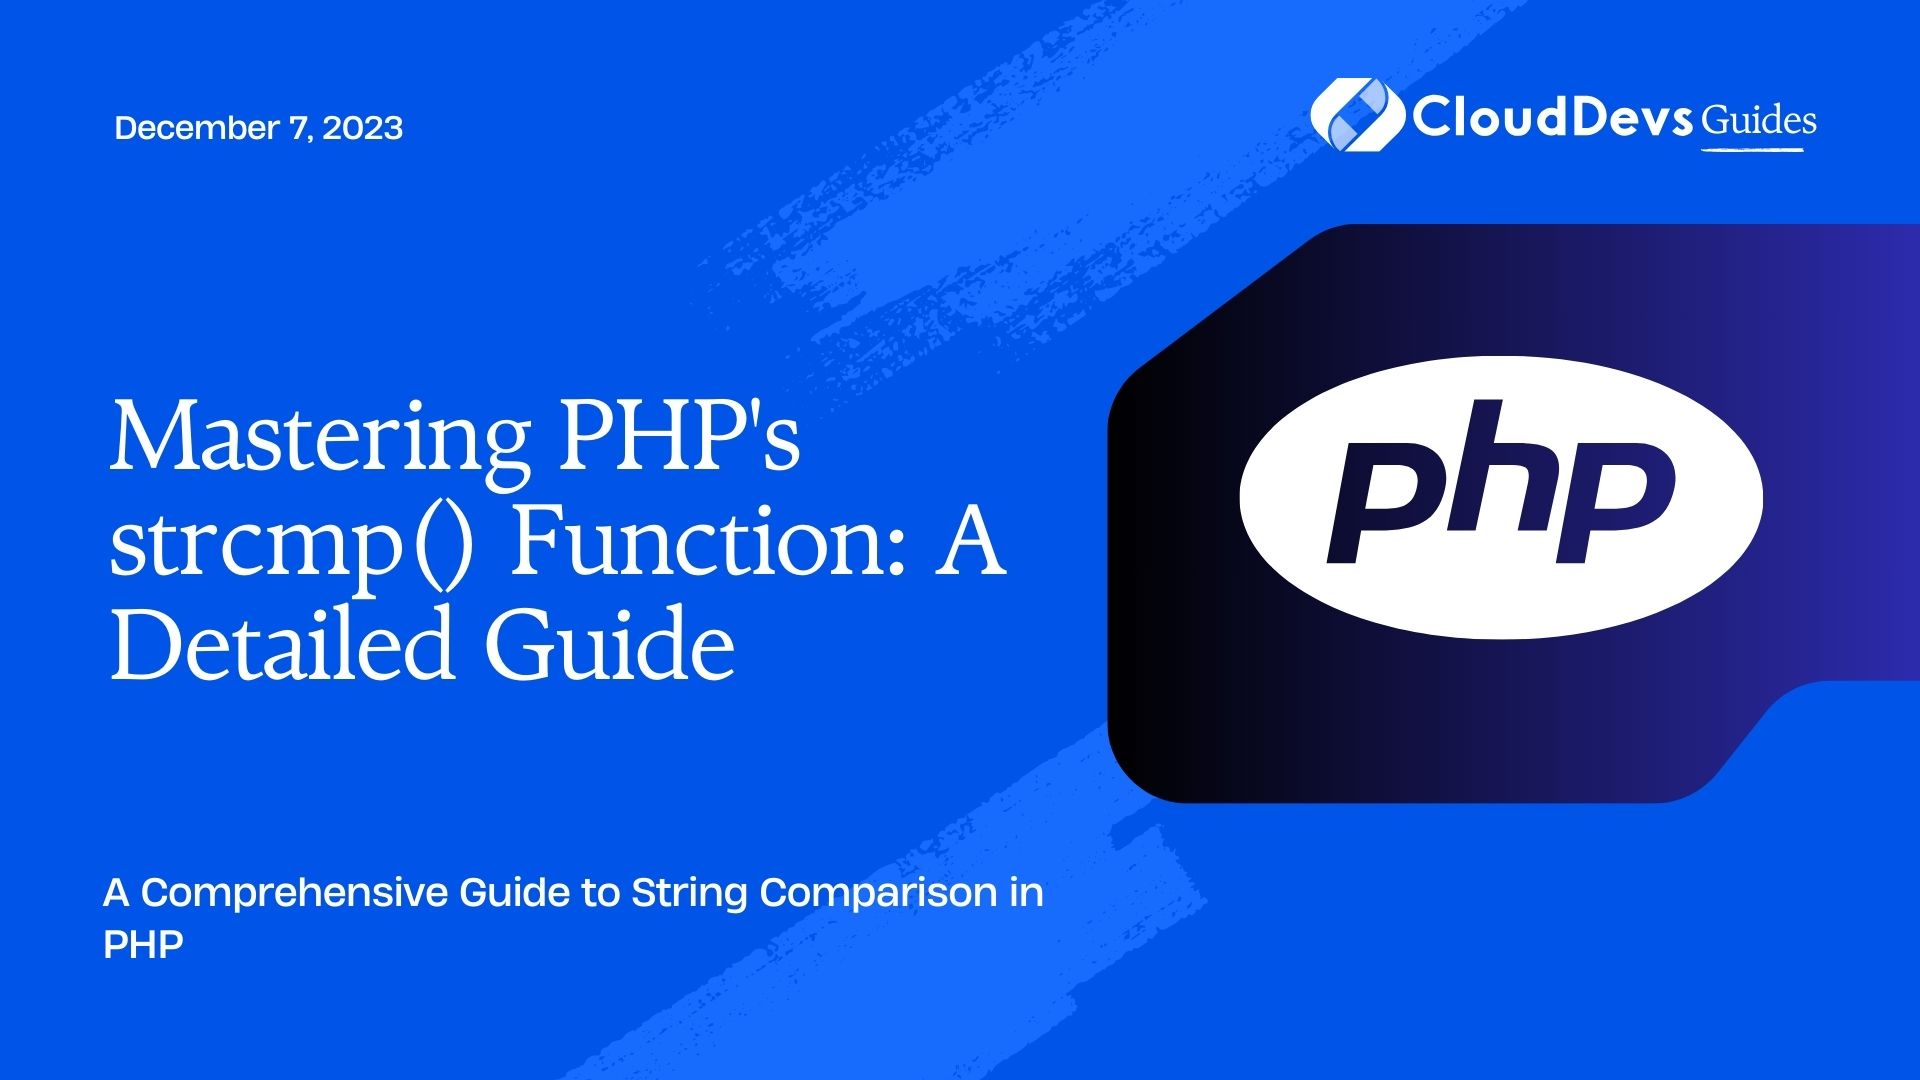 Mastering PHP's strcmp() Function: A Detailed Guide